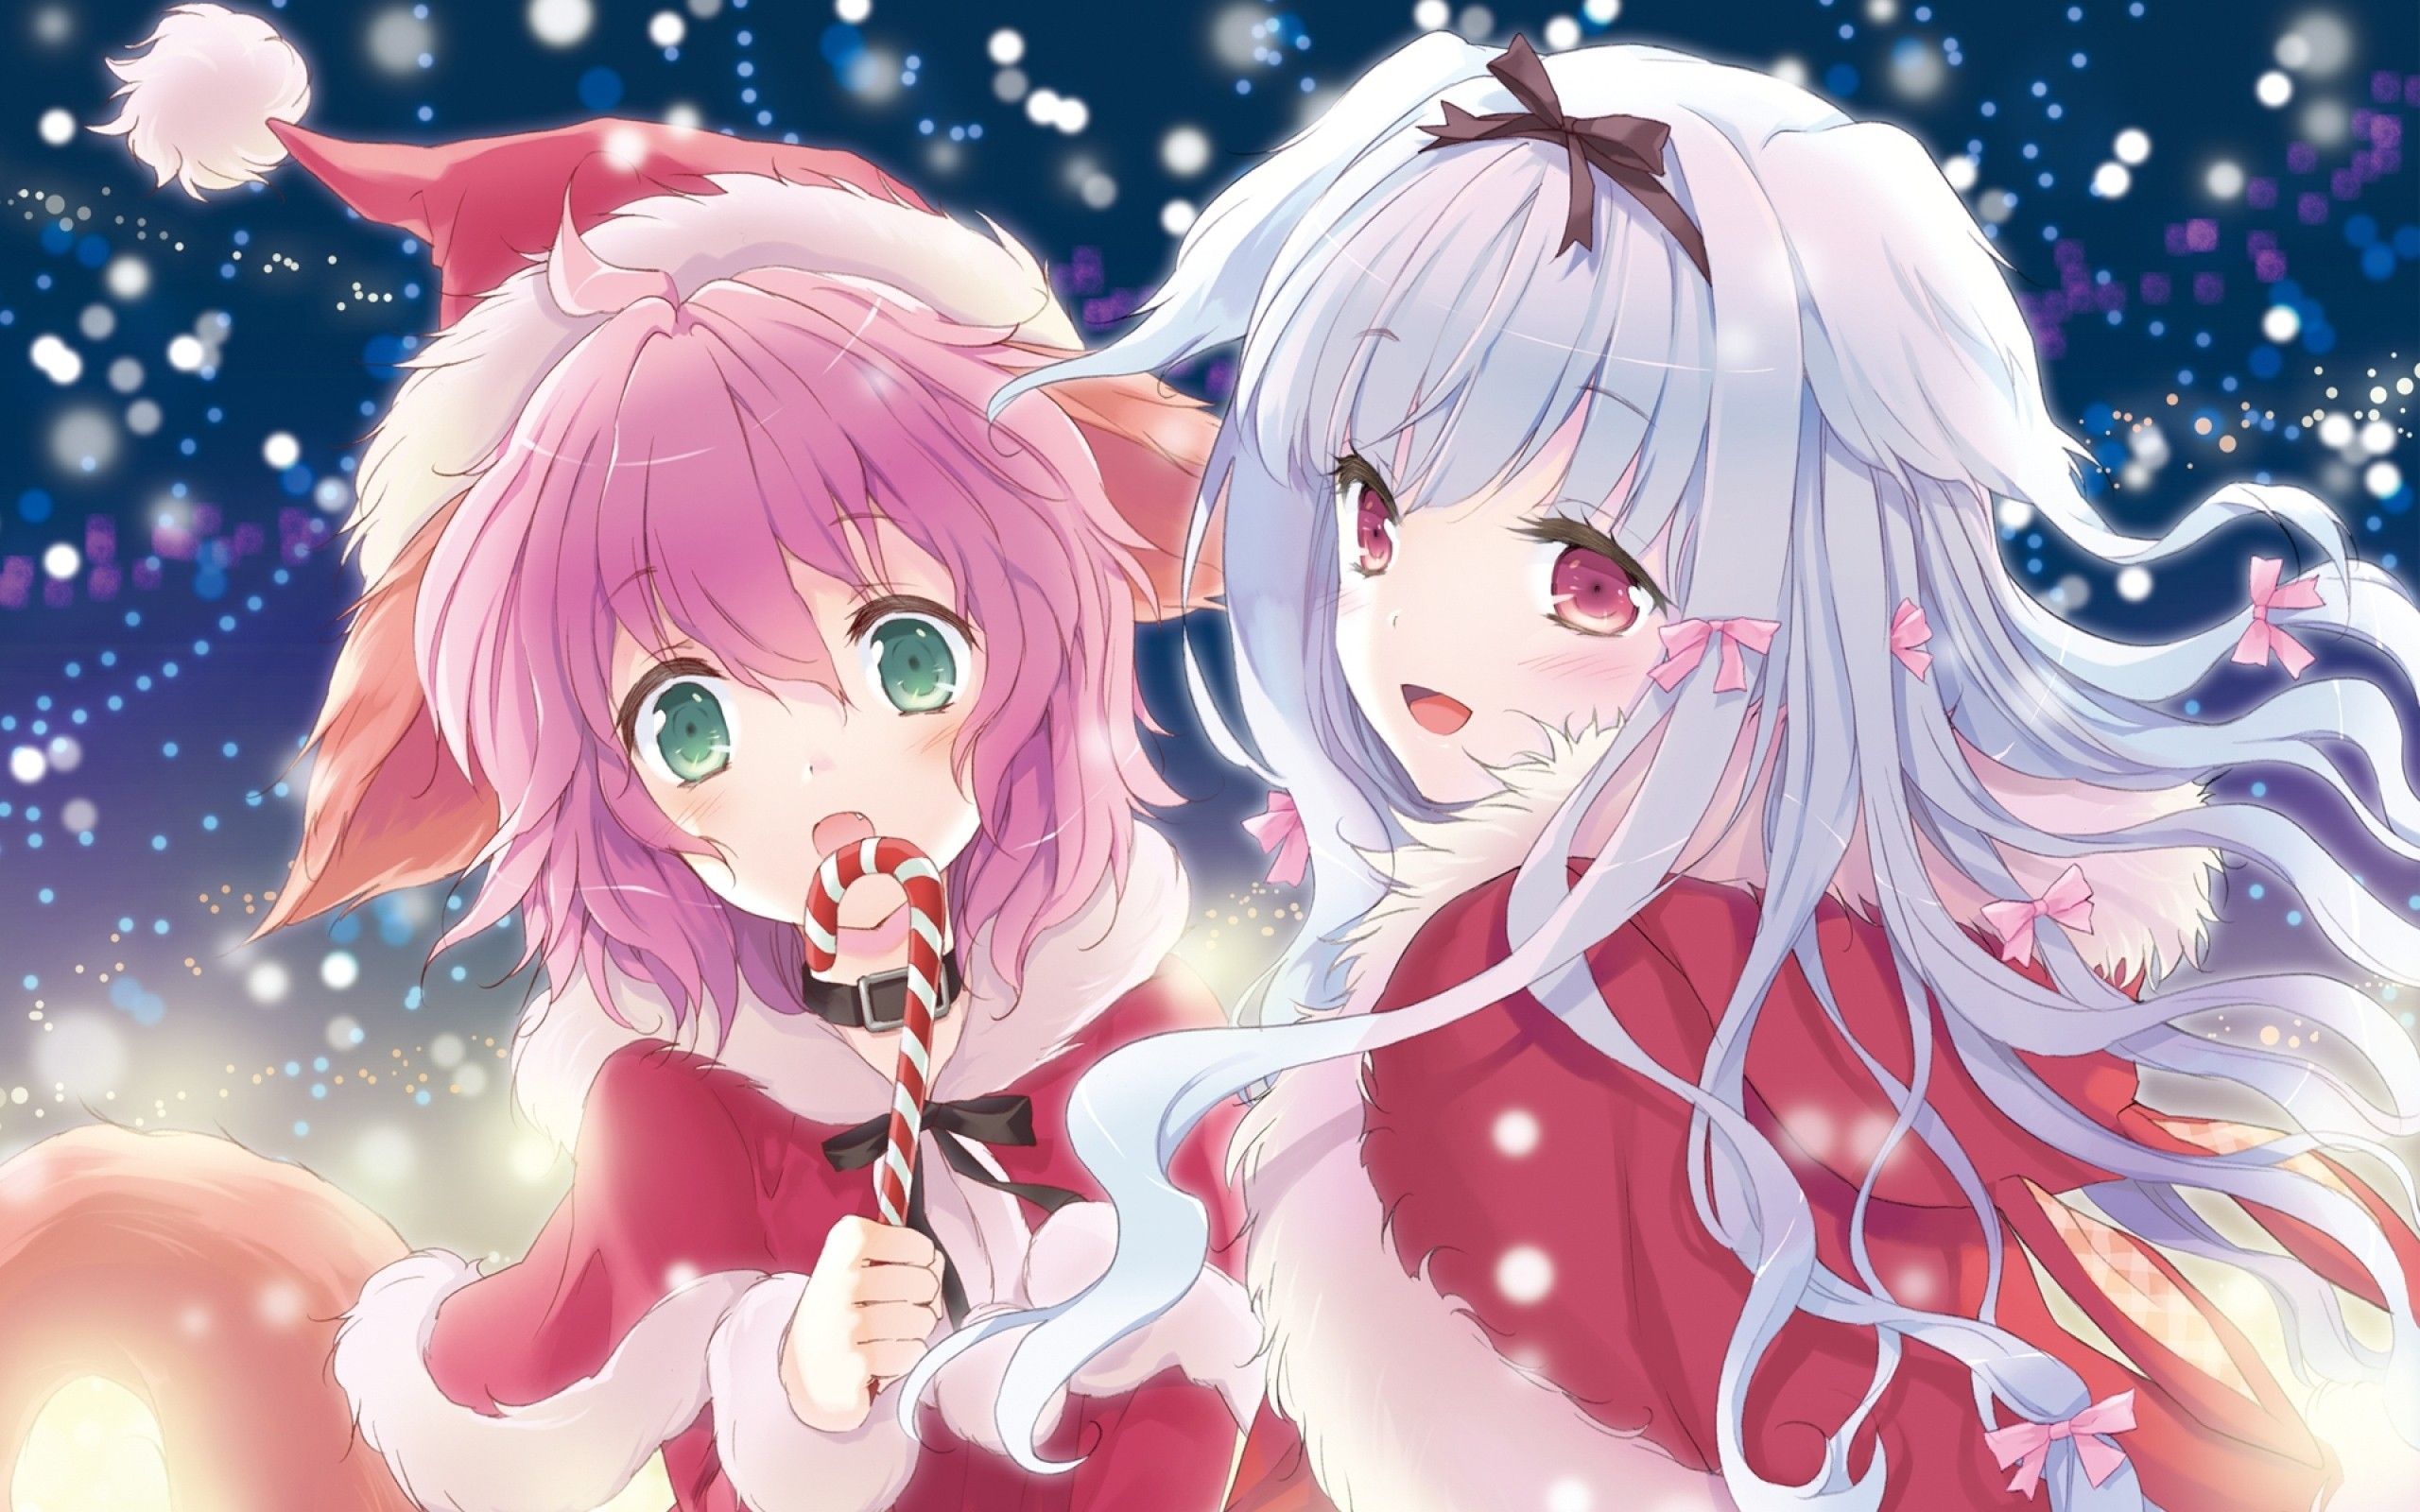 Anime Christmas wallpaperDownload free awesome HD background